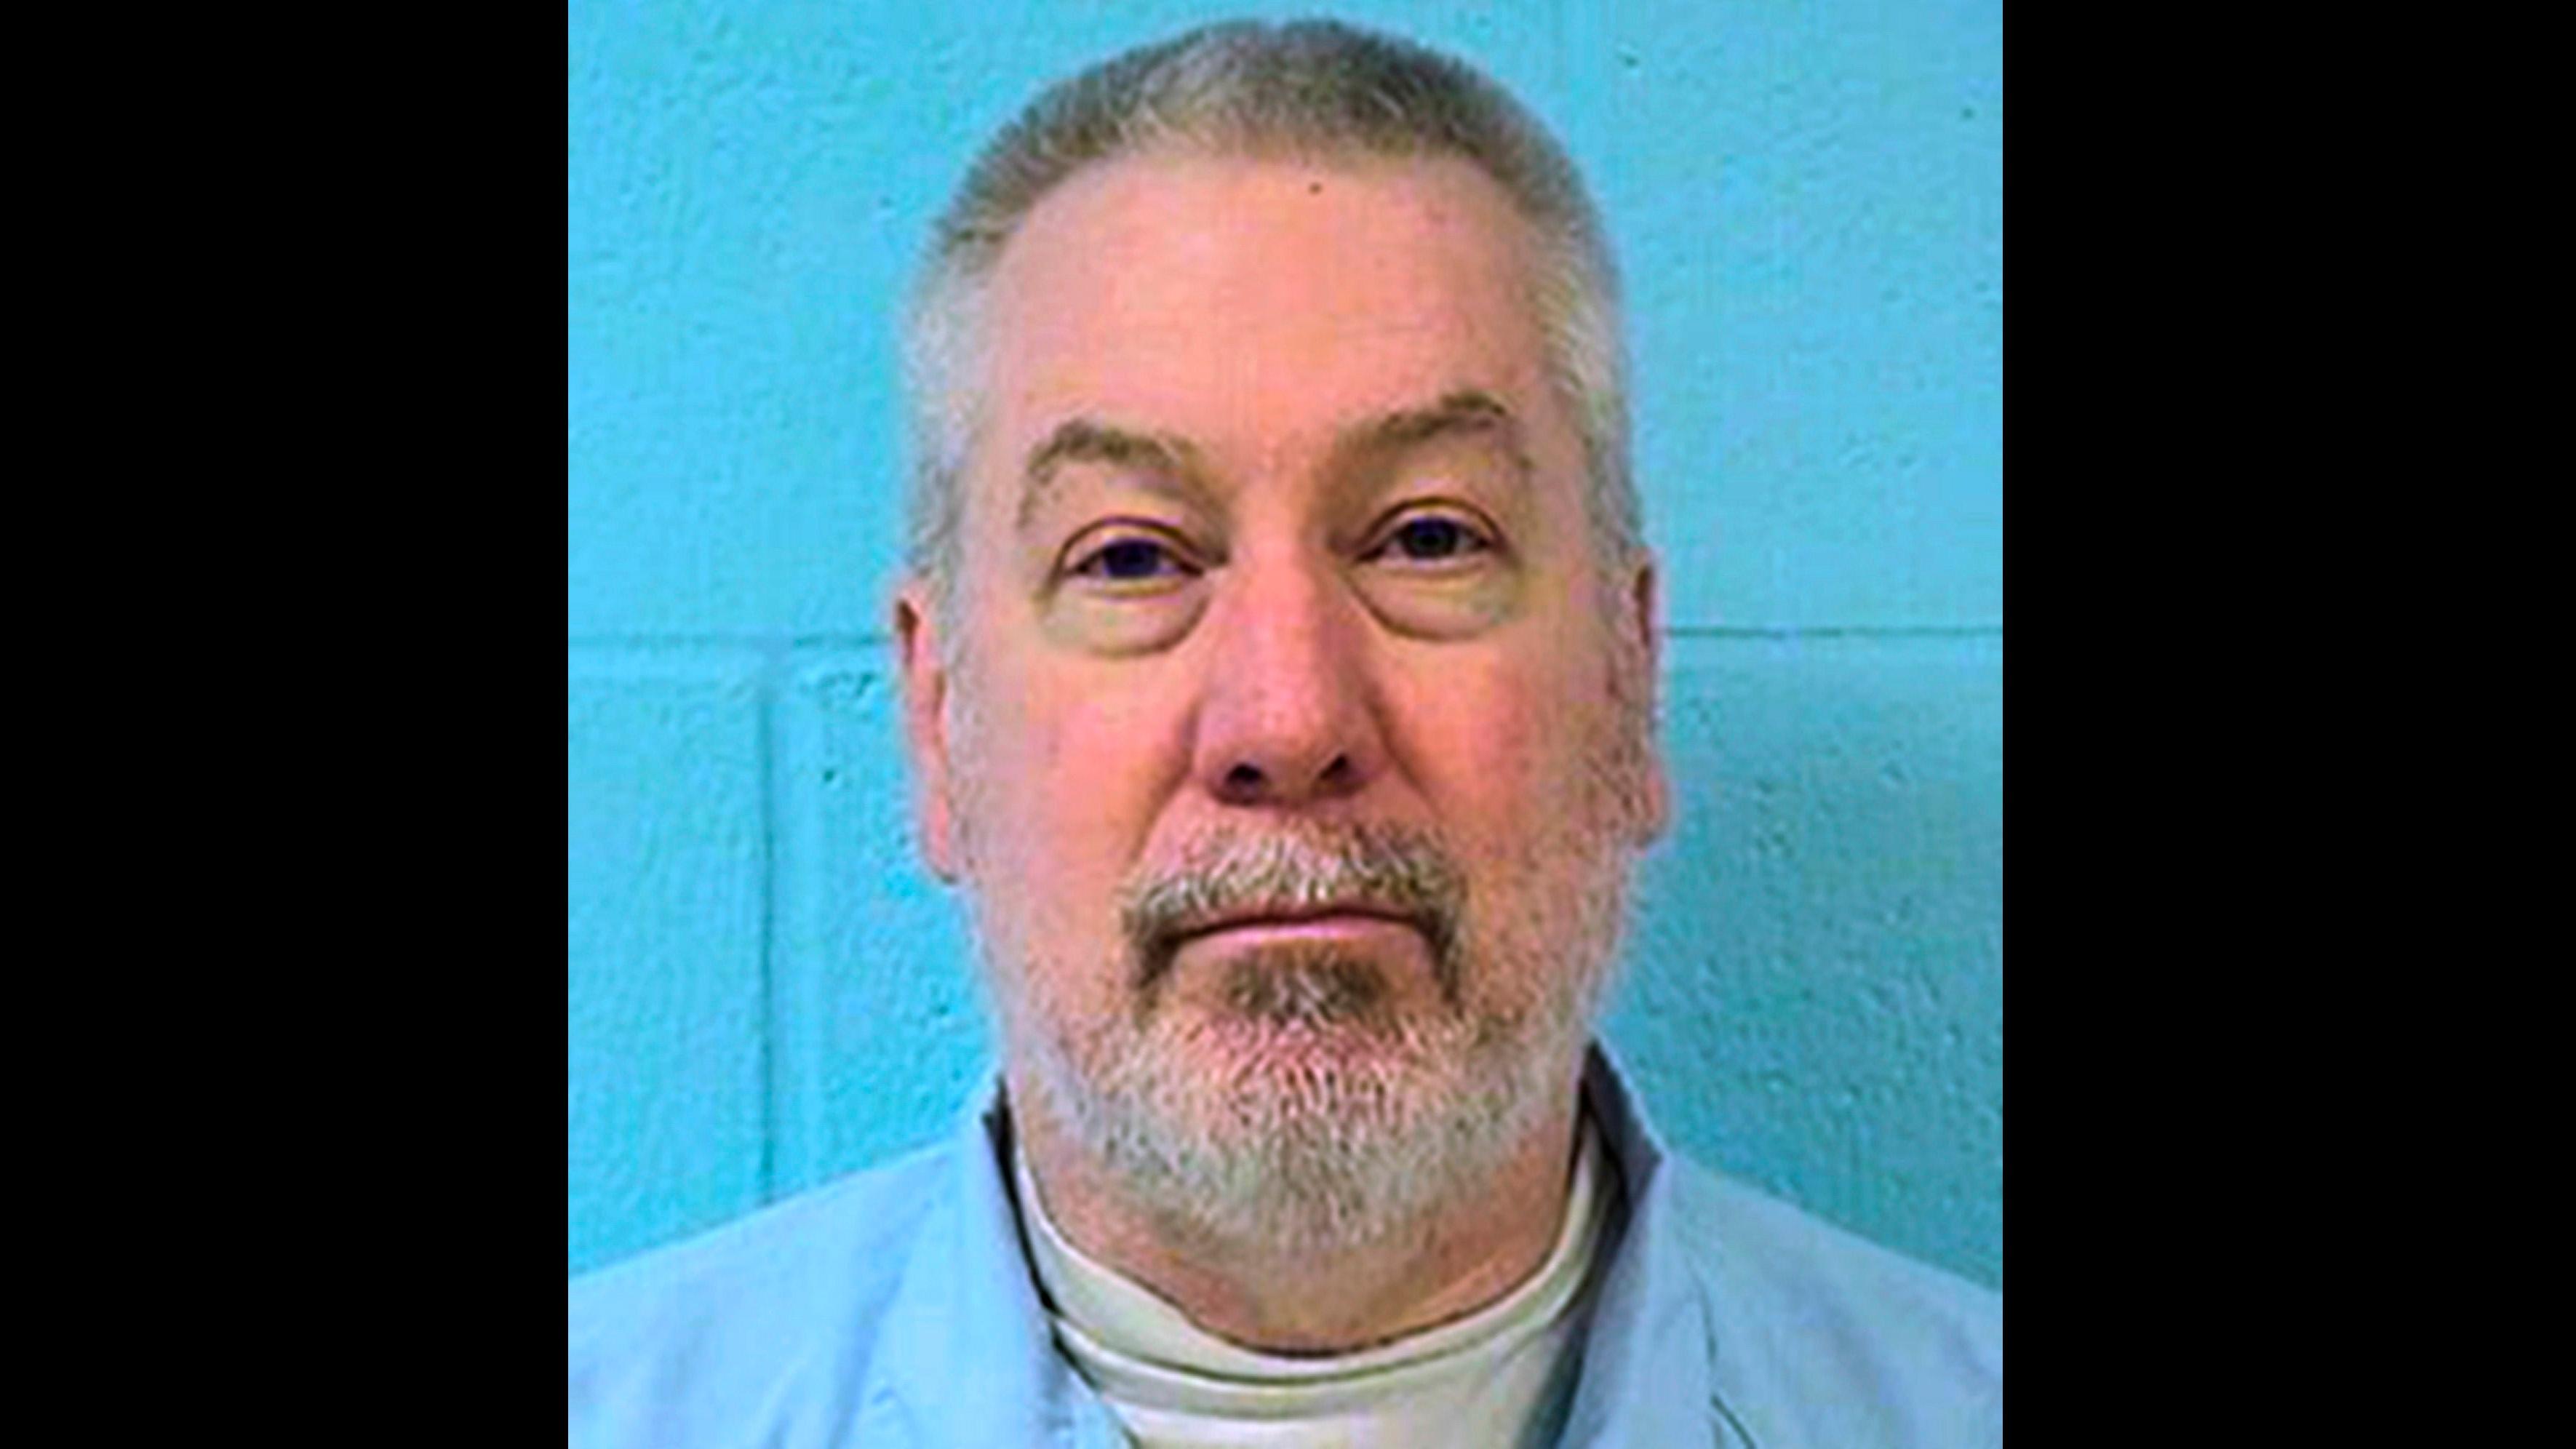 This undated file photo provided by the Illinois Department of Corrections shows former Bolingbrook, Ill., police officer Drew Peterson. (Illinois Department of Corrections via AP, File)